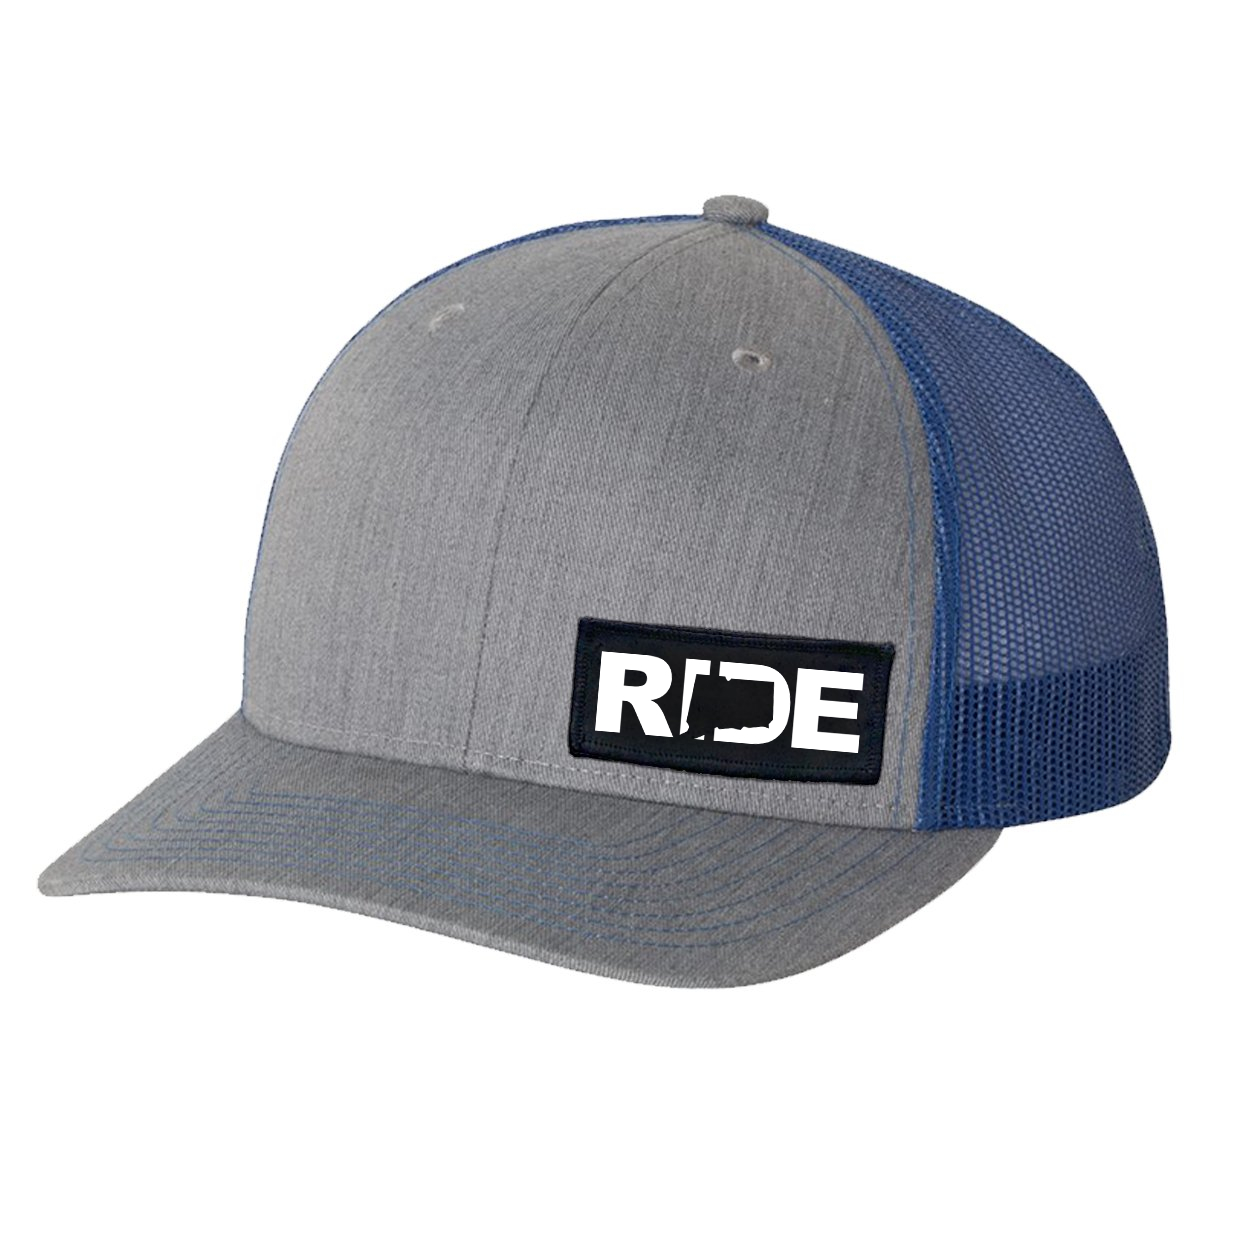 Ride Connecticut Night Out Woven Patch Snapback Trucker Hat Heather Grey/Royal (White Logo)